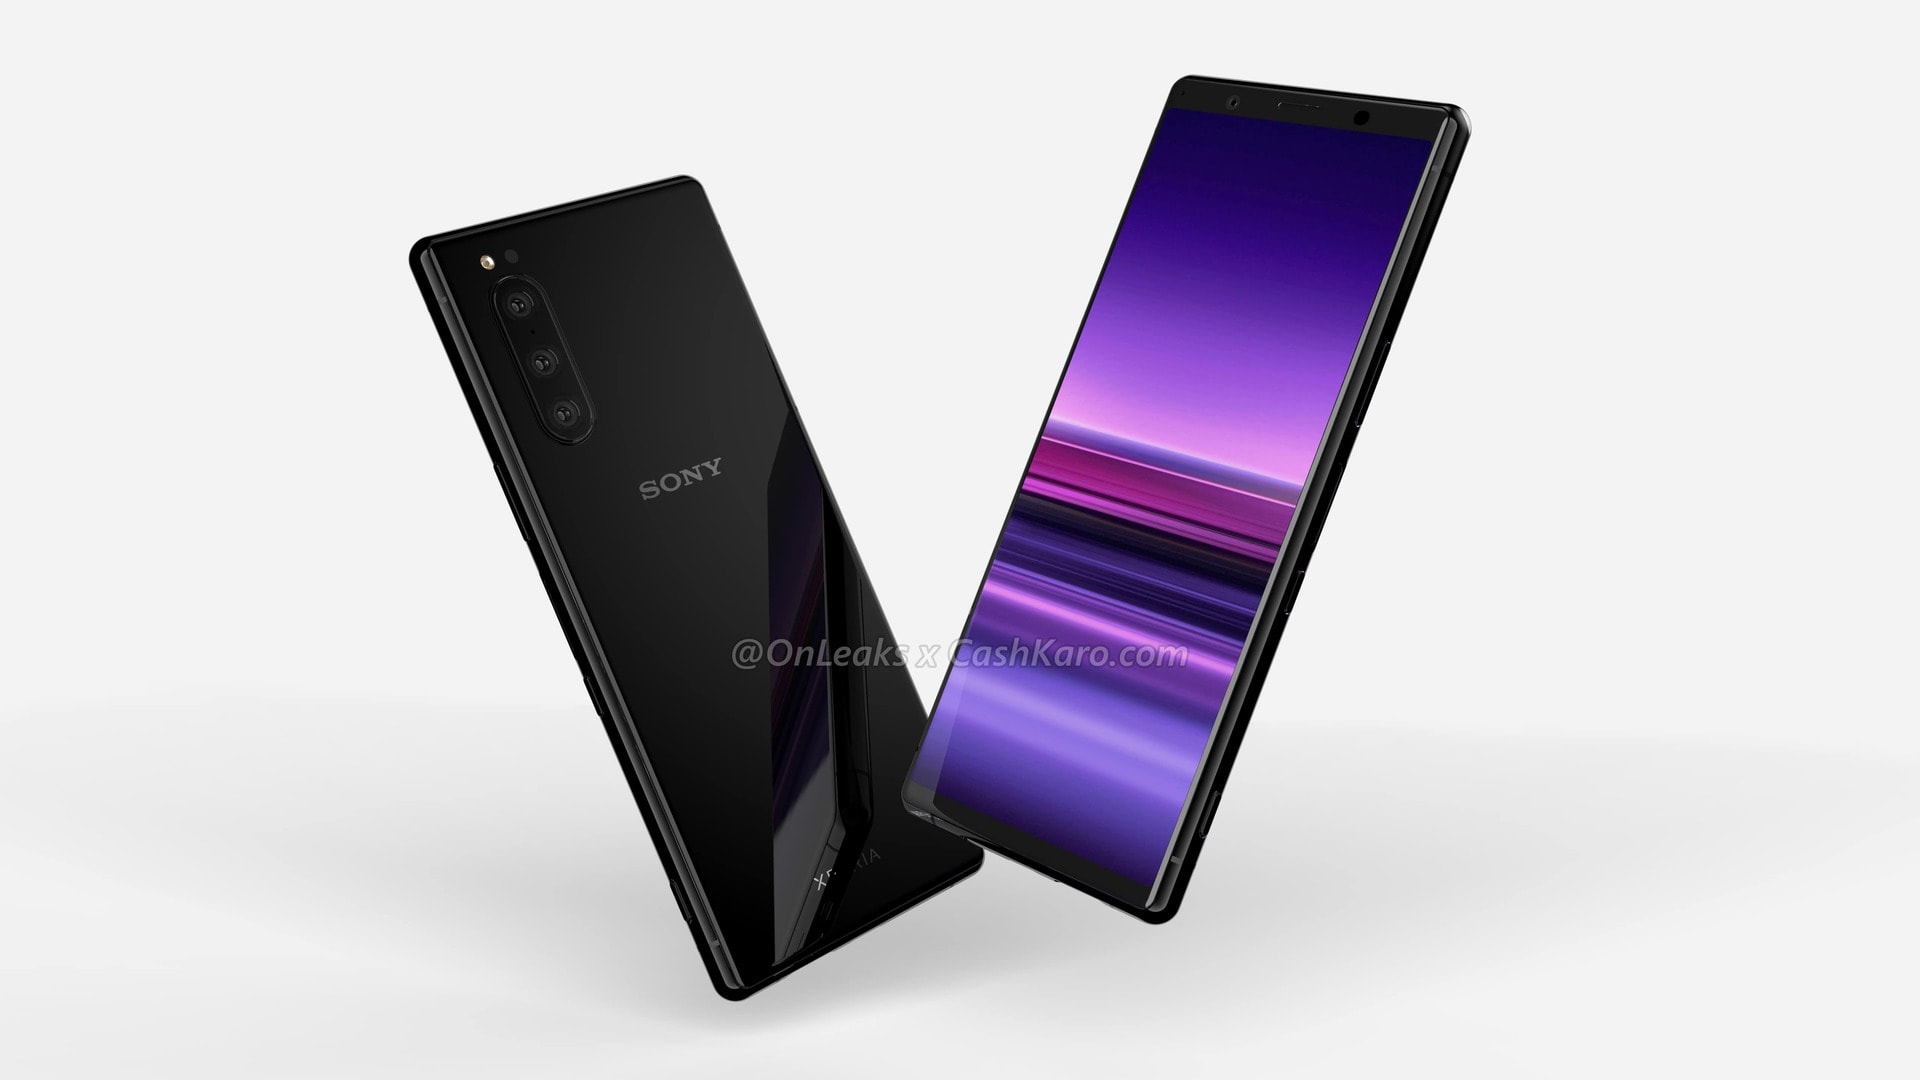 A leaked render of what appears to be the Sony Xperia 2.